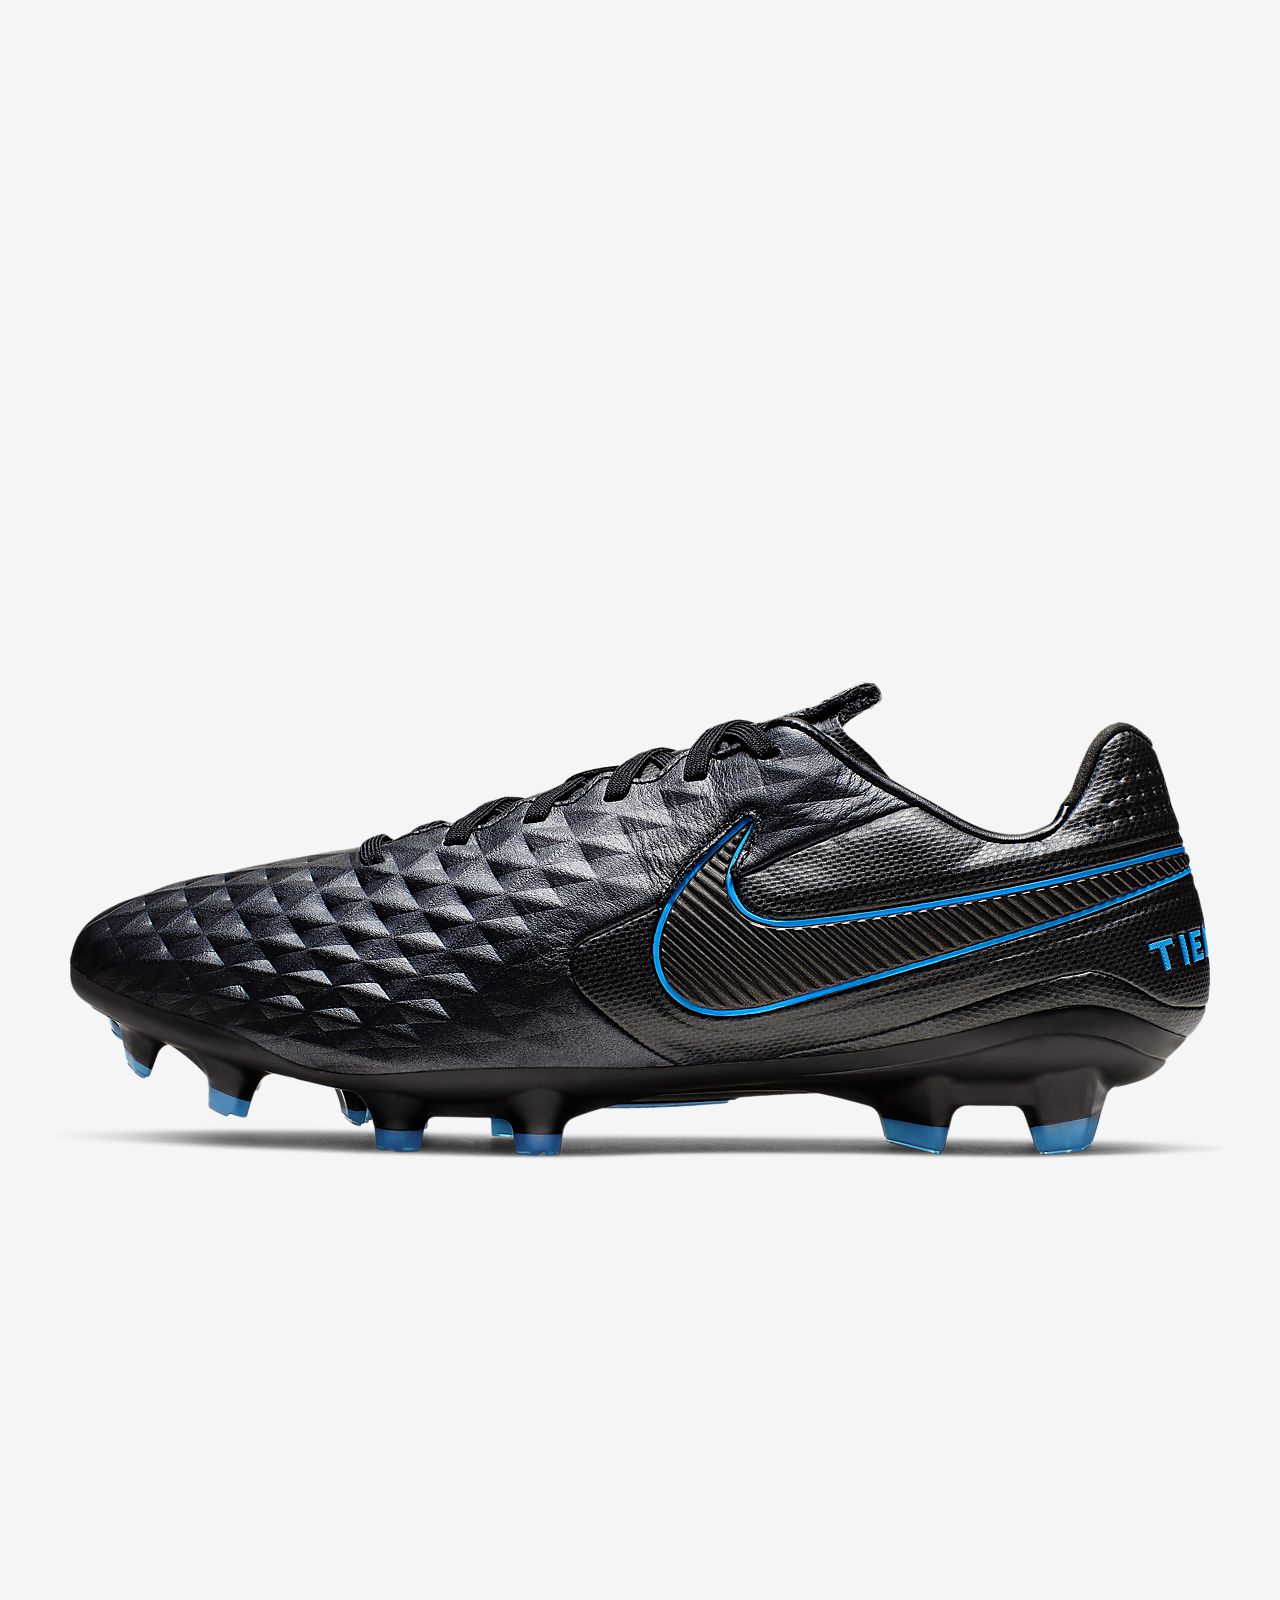 Pro FG Firm-Ground Football Boot. Nike 